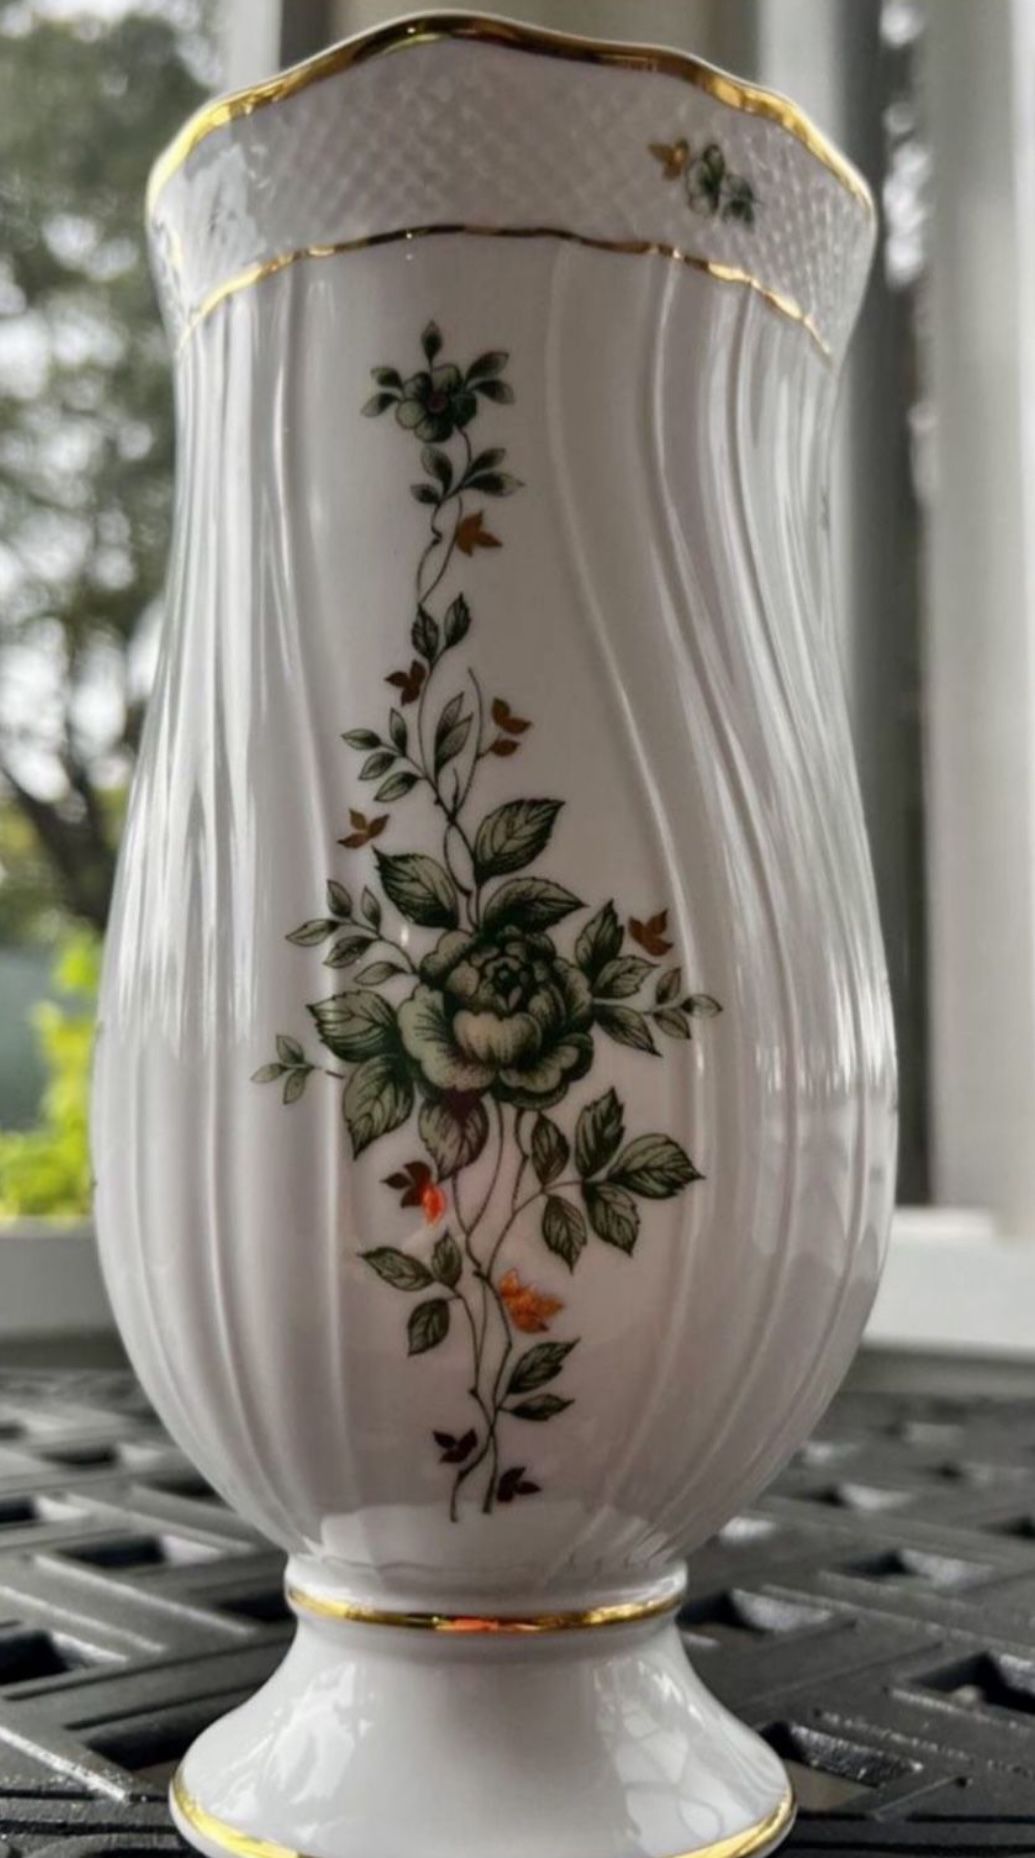 Vintage Hollohaza 1777 Hungary vase porcelain green flowers gold trim In excellent condition  Marked  RARE  Approx 8.5” H x 4.5” W